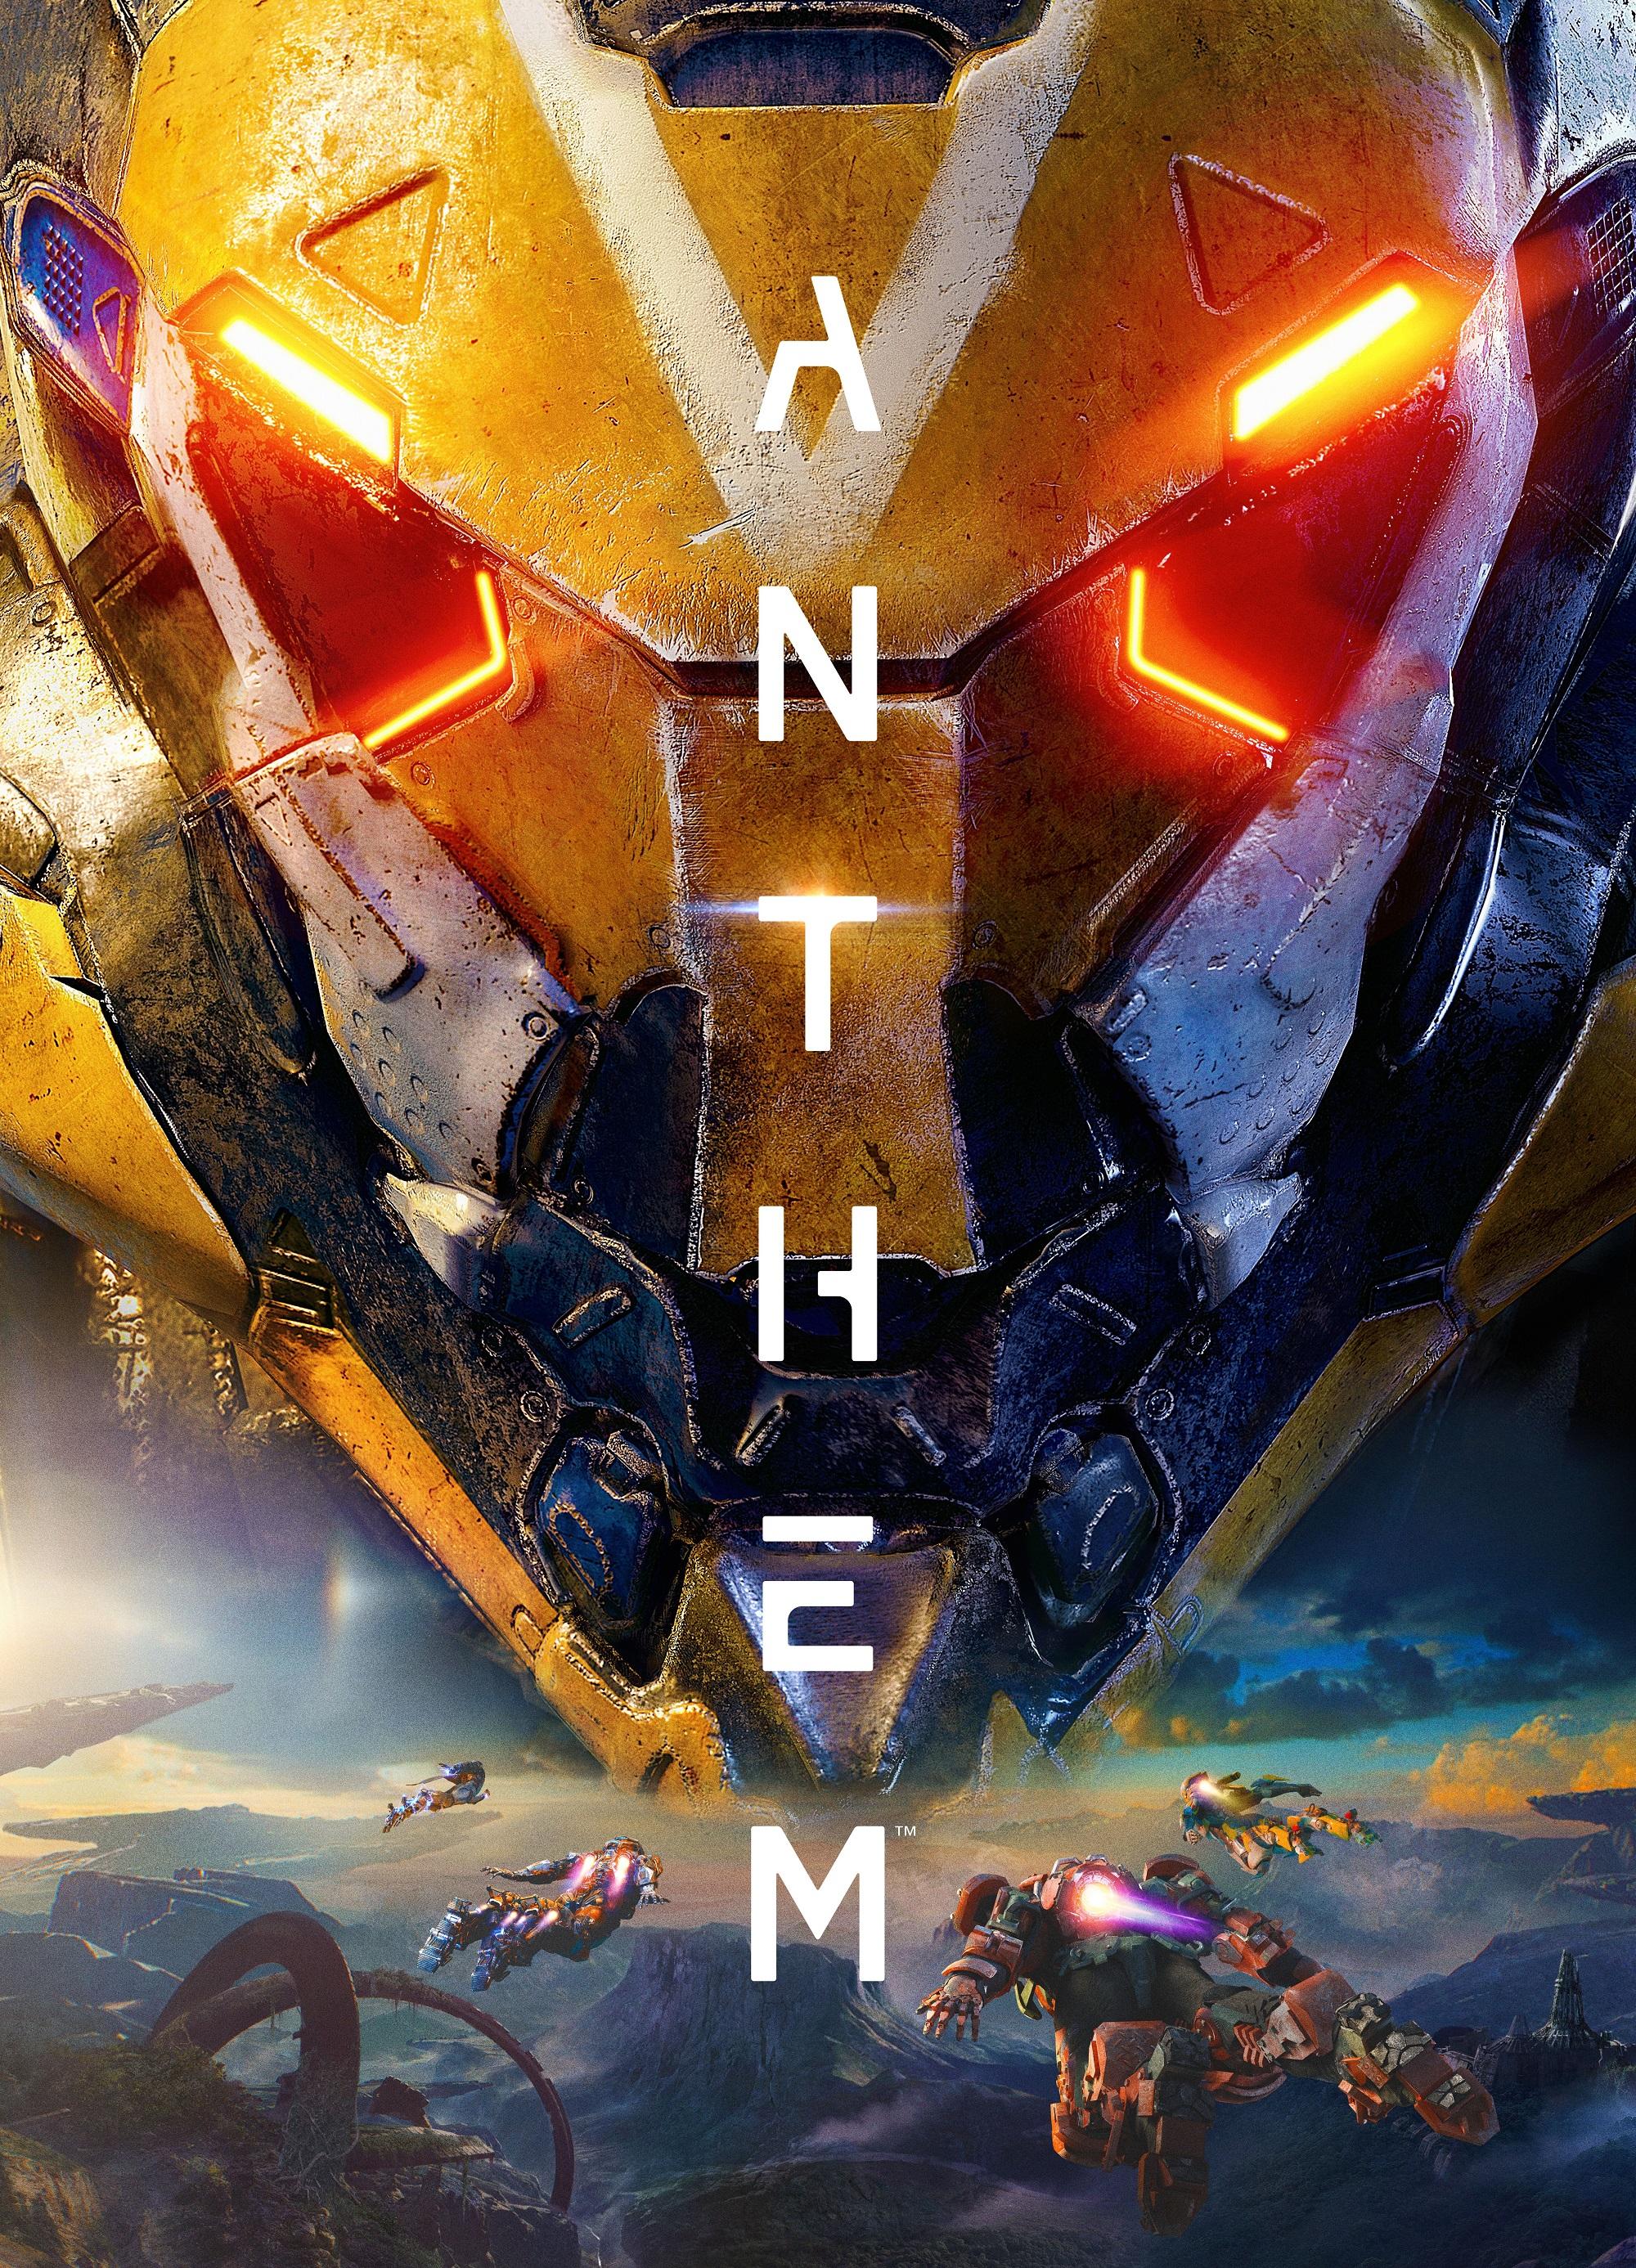 Anthem' Key Art Revealed Along With New Teaser Trailer Ahead Of E3